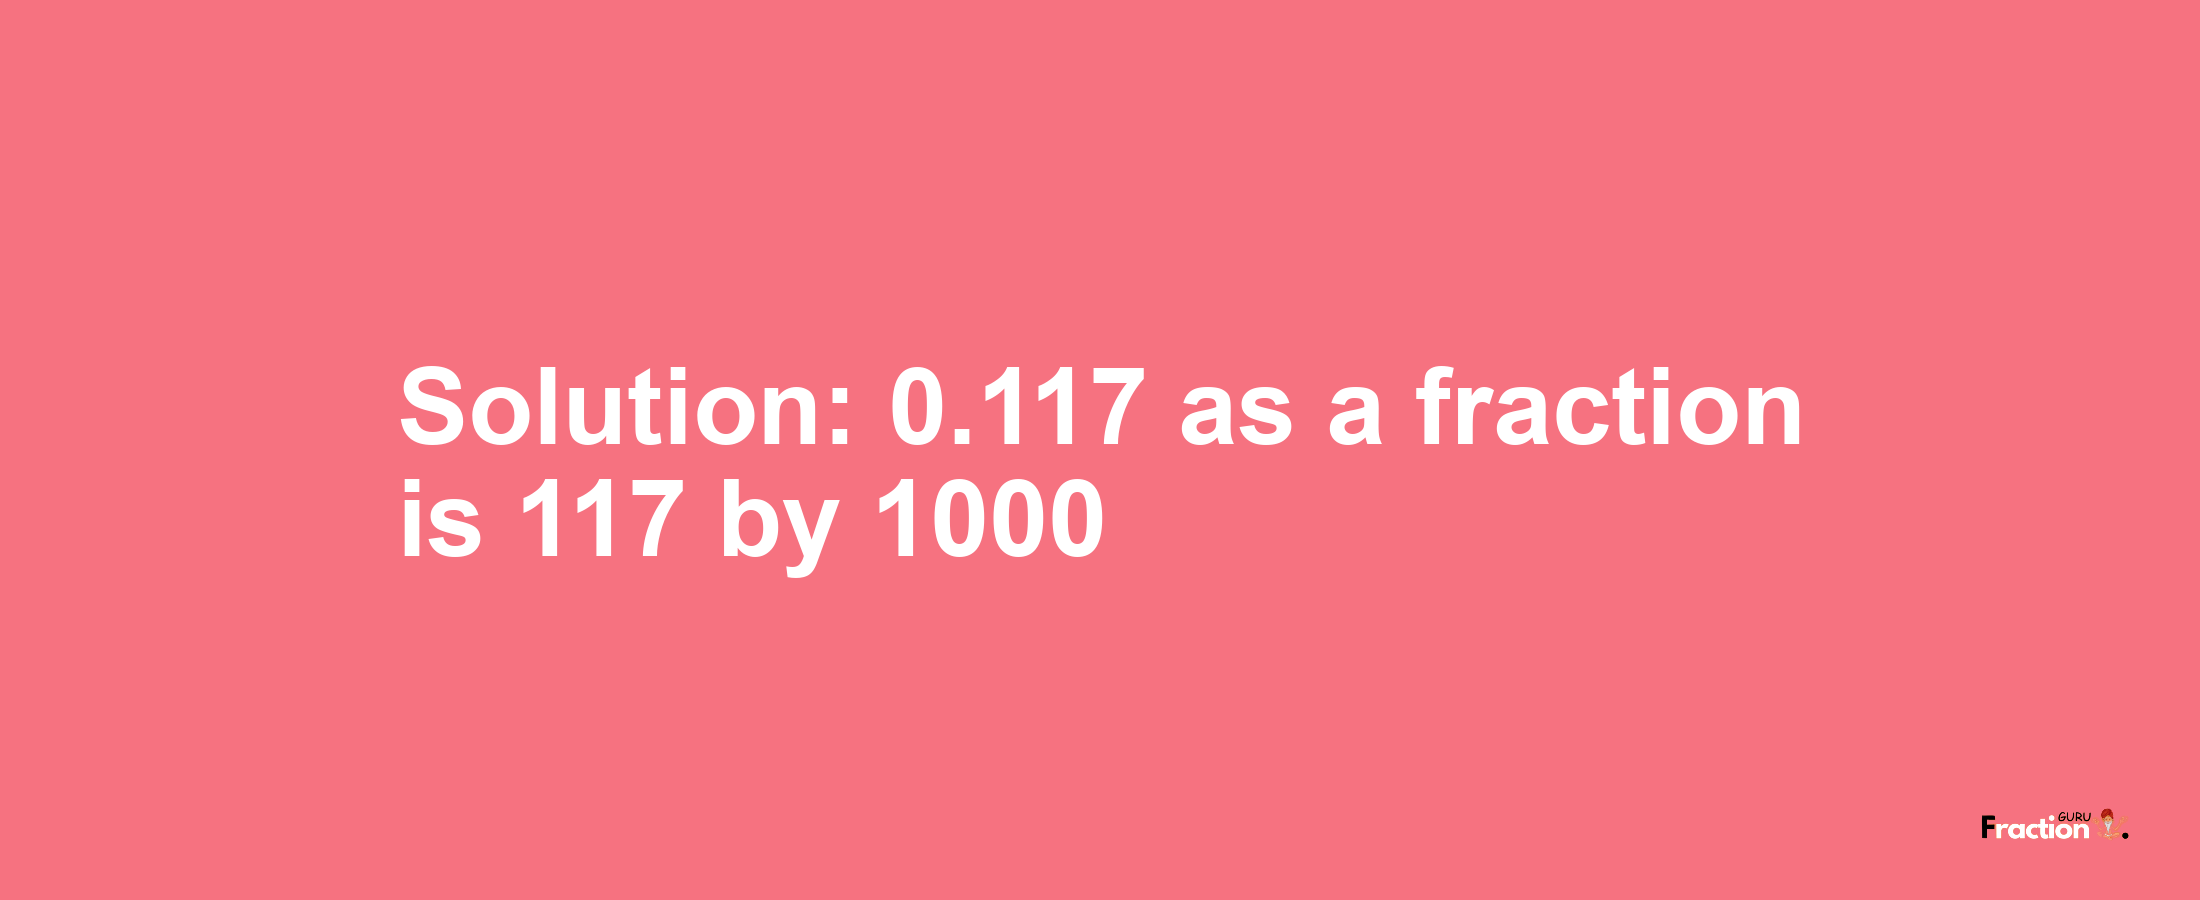 Solution:0.117 as a fraction is 117/1000